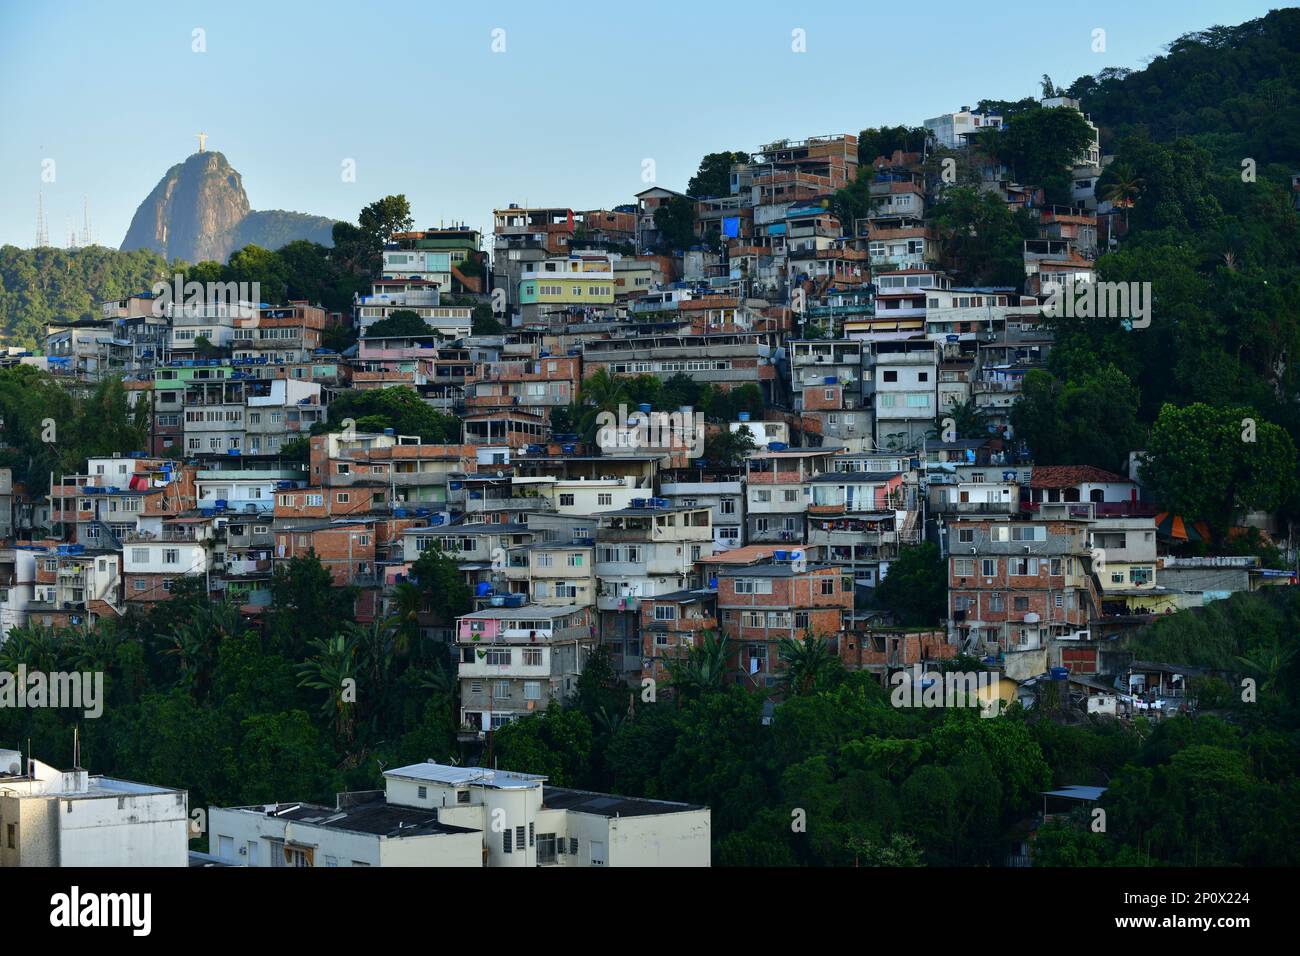 Favela de Tabaraja with the Corcovado mountain and the statue of Christ the Redeemer in background, Rio de Janeiro, Brazil Stock Photo